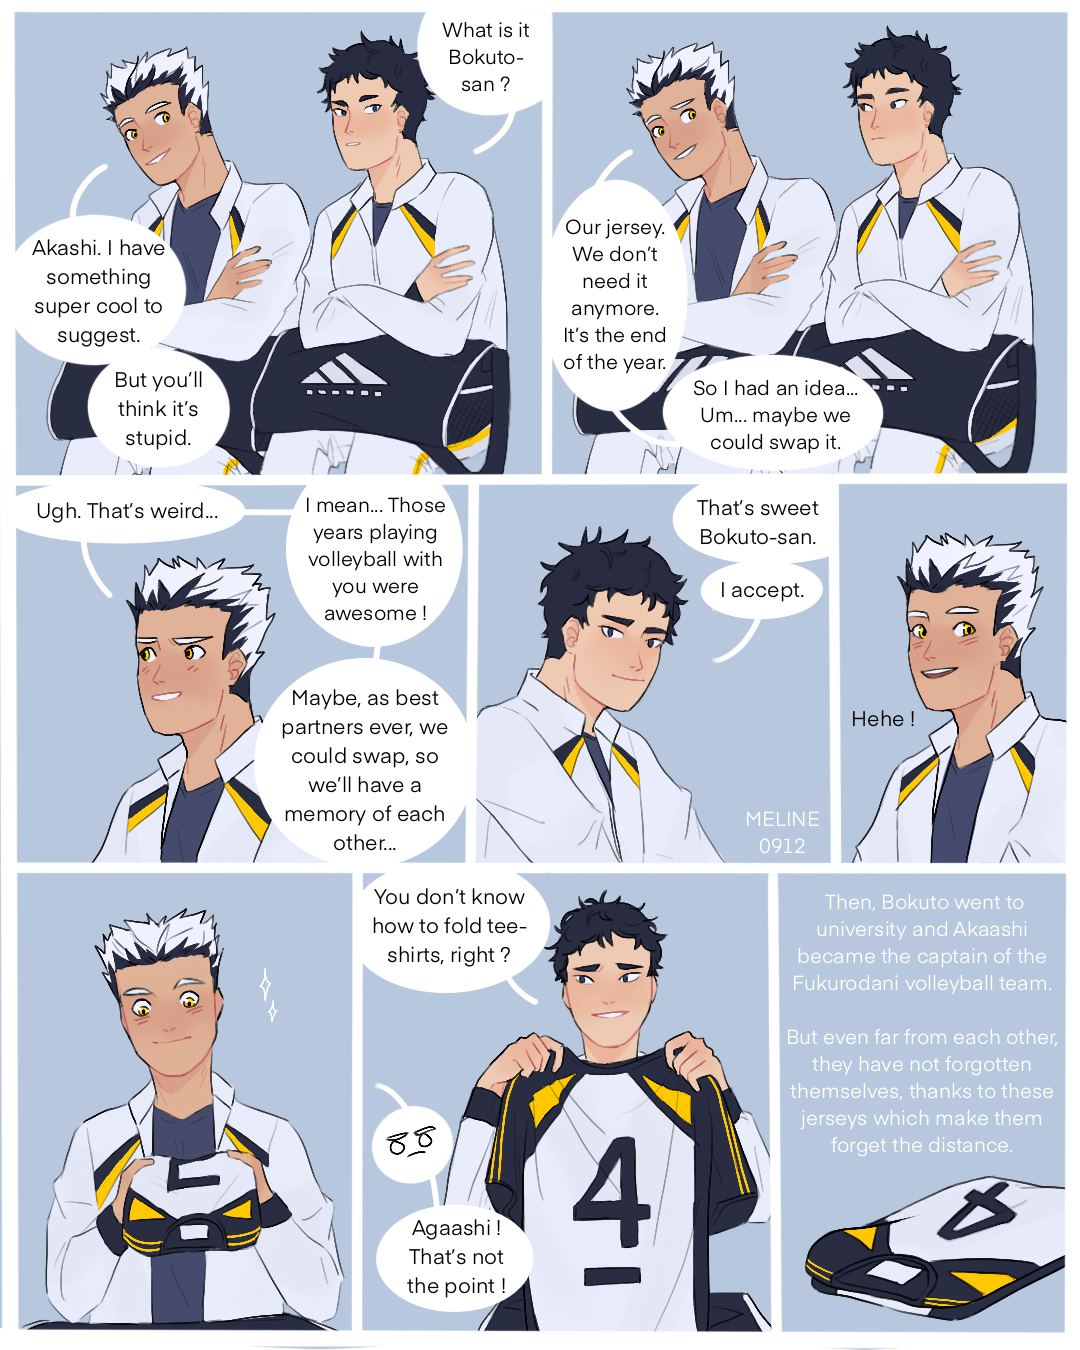 meline0912:A stupid comic because they are stupidForget it after read it or you’ll never sleep again because of the nightmares :( but you can keep in mind that they swap they jerseys because it’s cute 